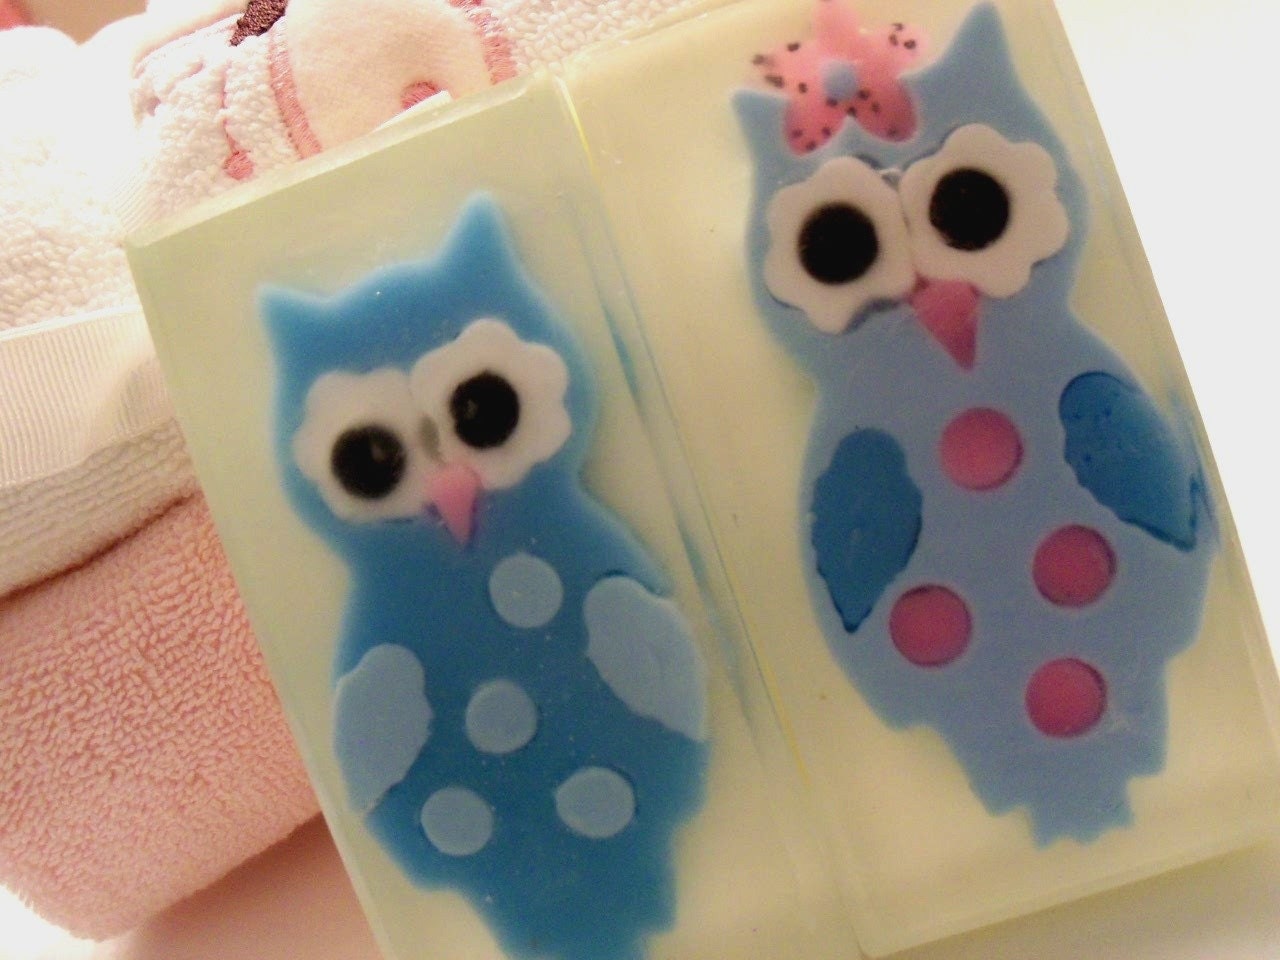 Hootie and Owlivia Soap Set - U Get 1 Hootie Soap and 1 Owlivia Soap - Cotton Candy - Great for Gift Giving - Party Favors - Baby Showers - All Occasions